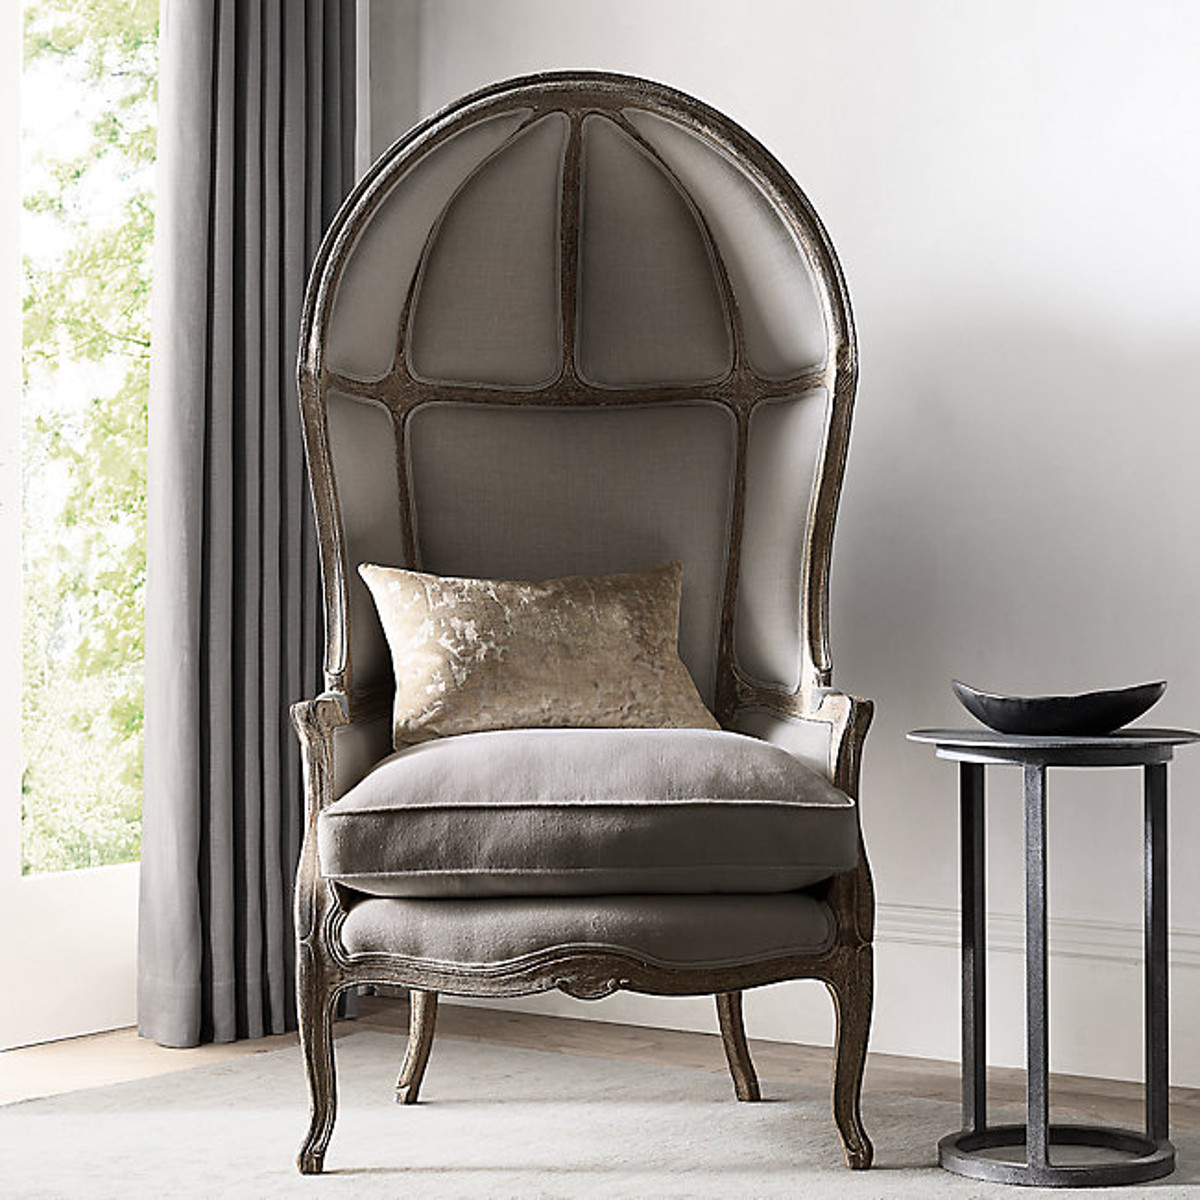 Le Concierge French Armchair Agathao House Of Design